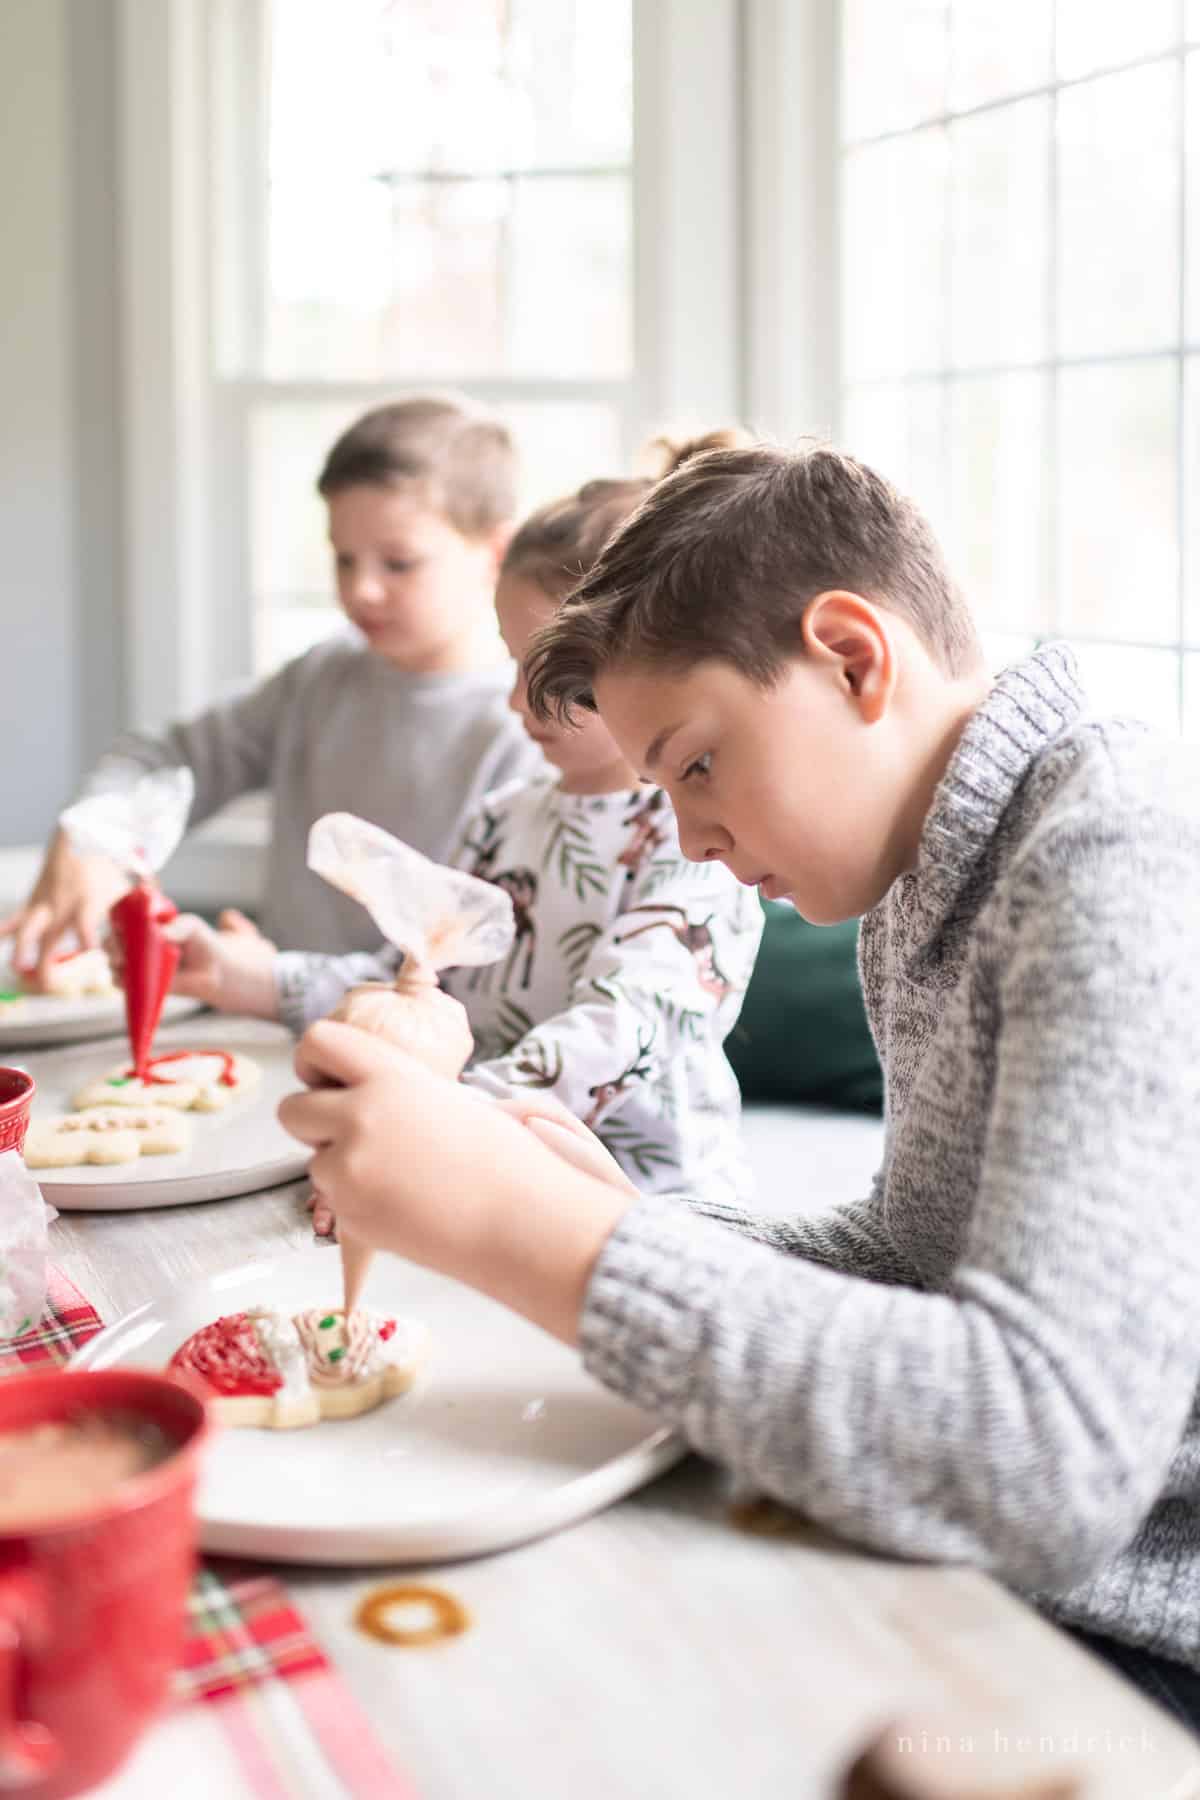 Children decorating cookies at a Christmas party